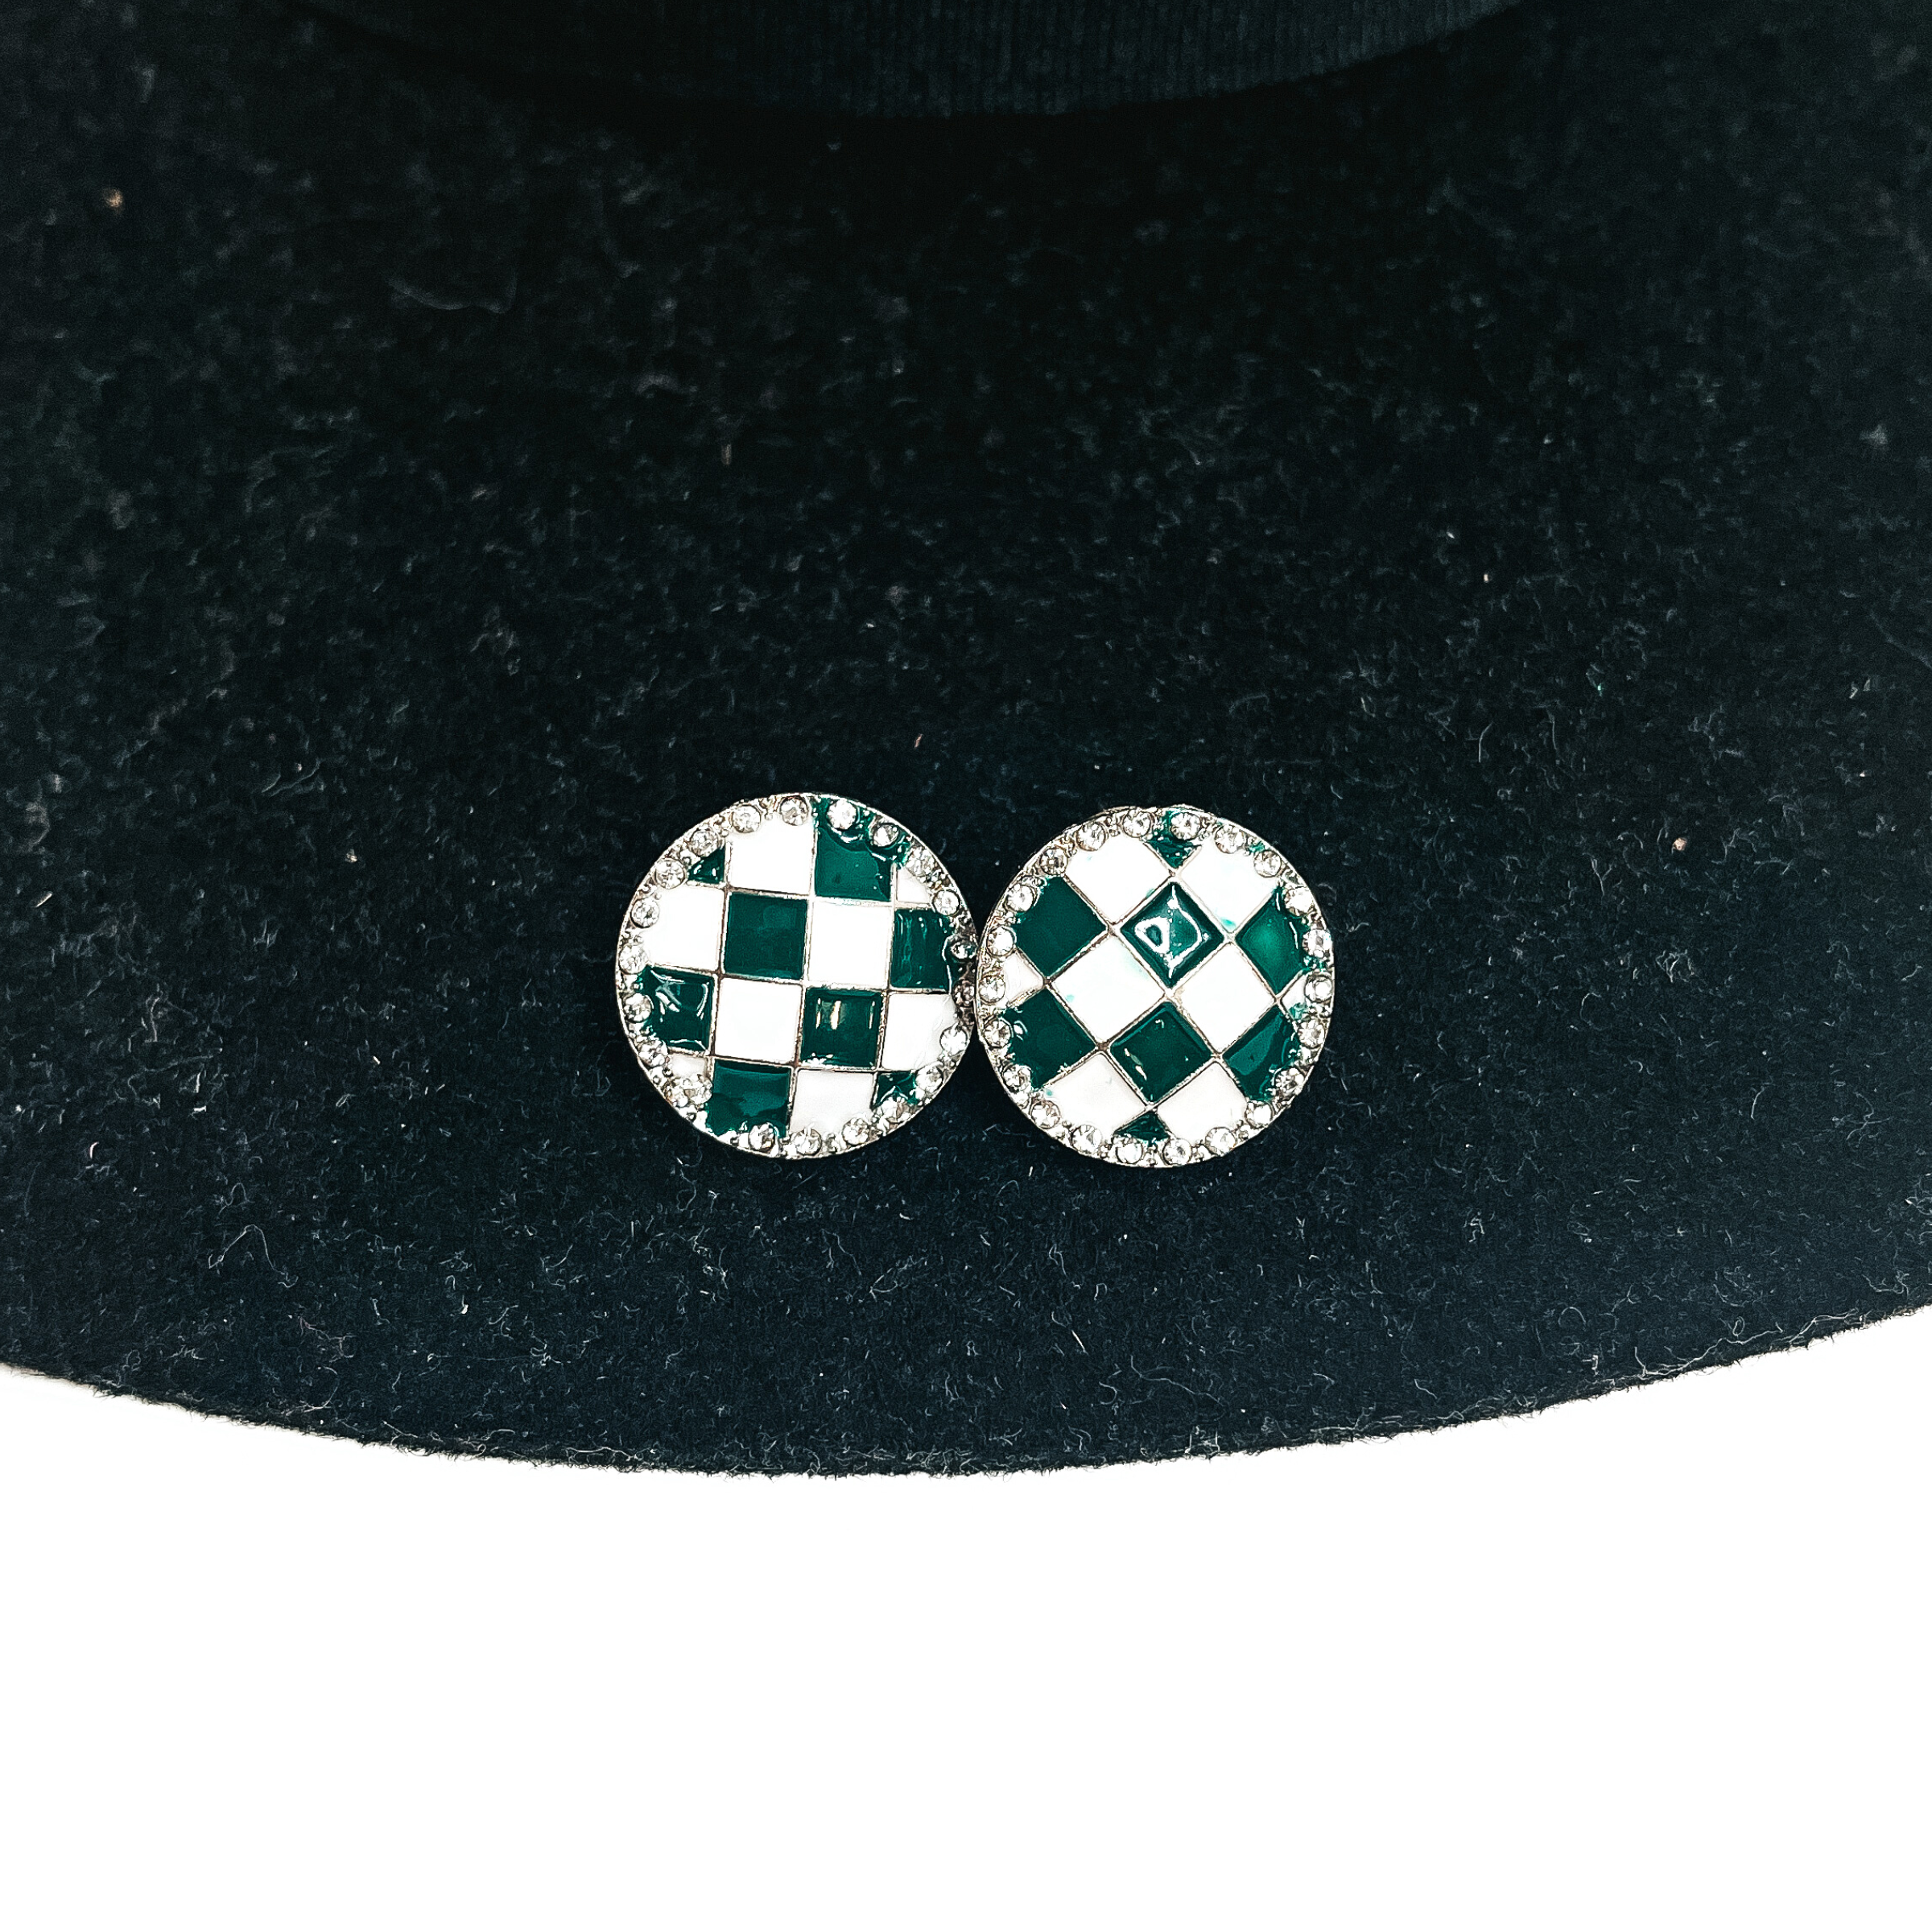 This is a white and green checkered patterned stud earrings in a silver  setting with clear crystals all around. This pair of  earrings is laying on a black felt hat brim and on a white background.